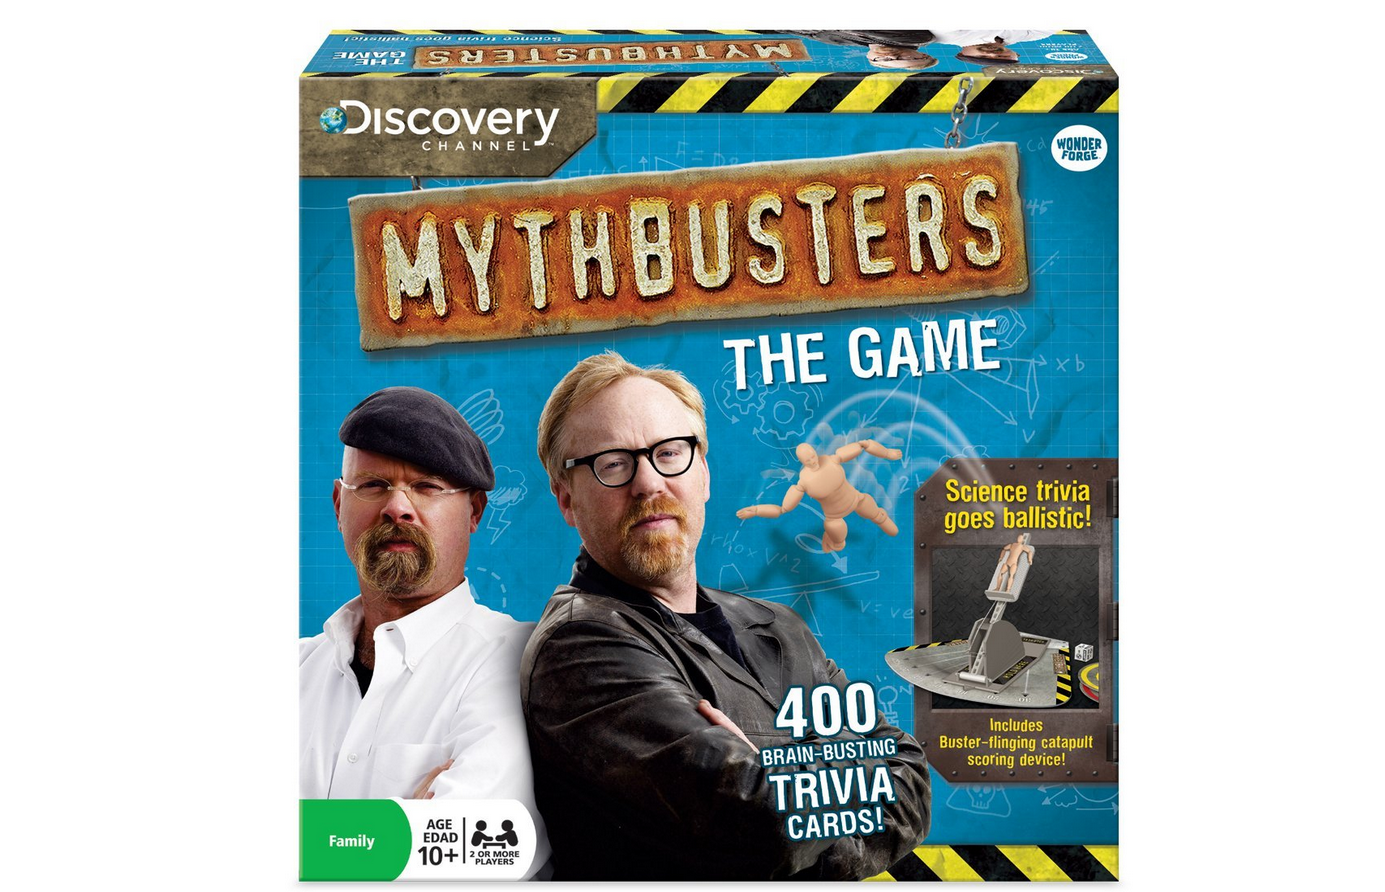  Mythbusters The Game